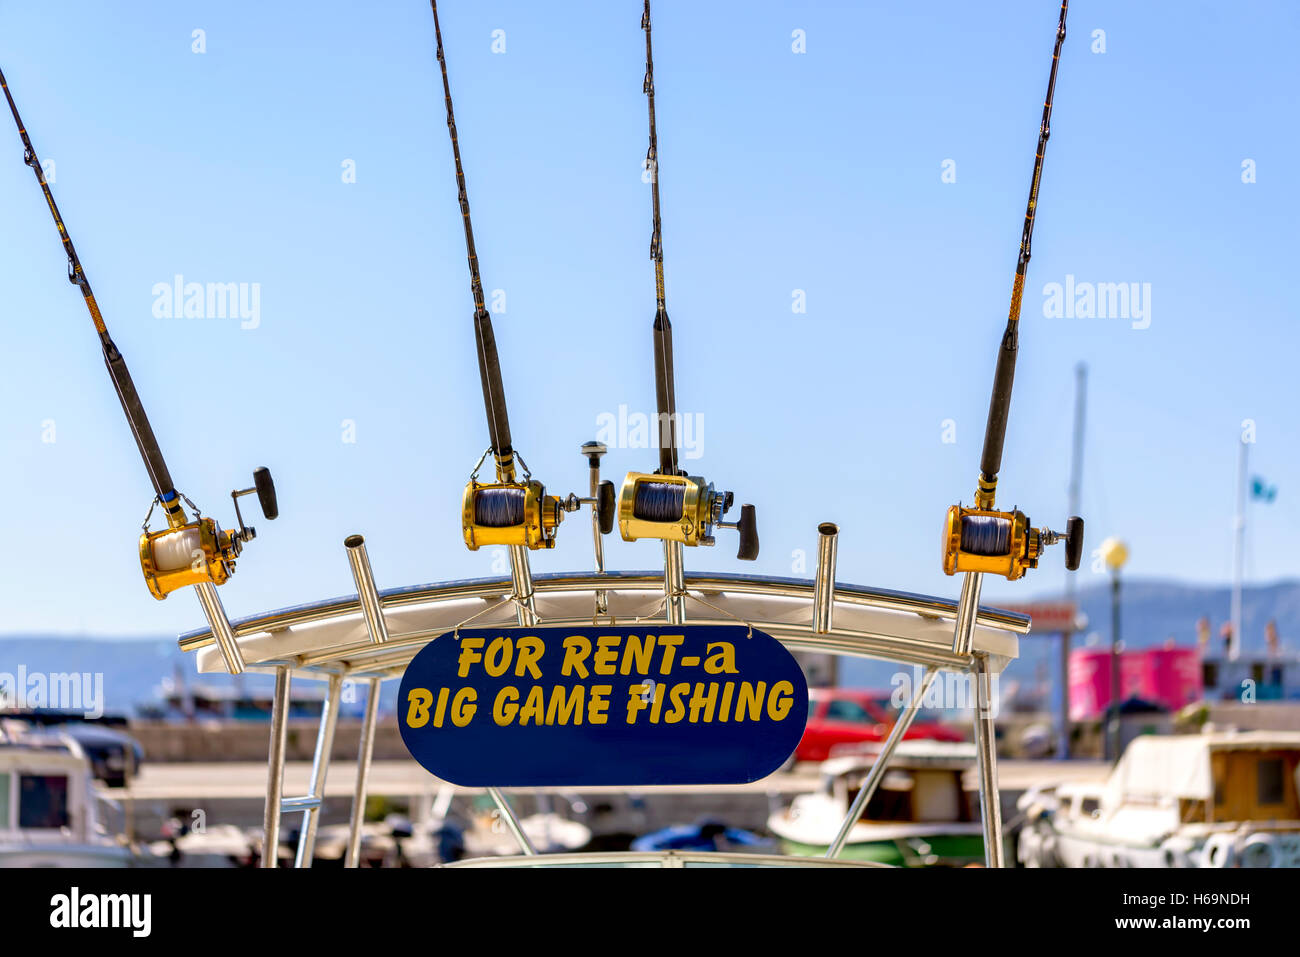 Big game fishing and equipment for rental with sign and equipment displayed Stock Photo